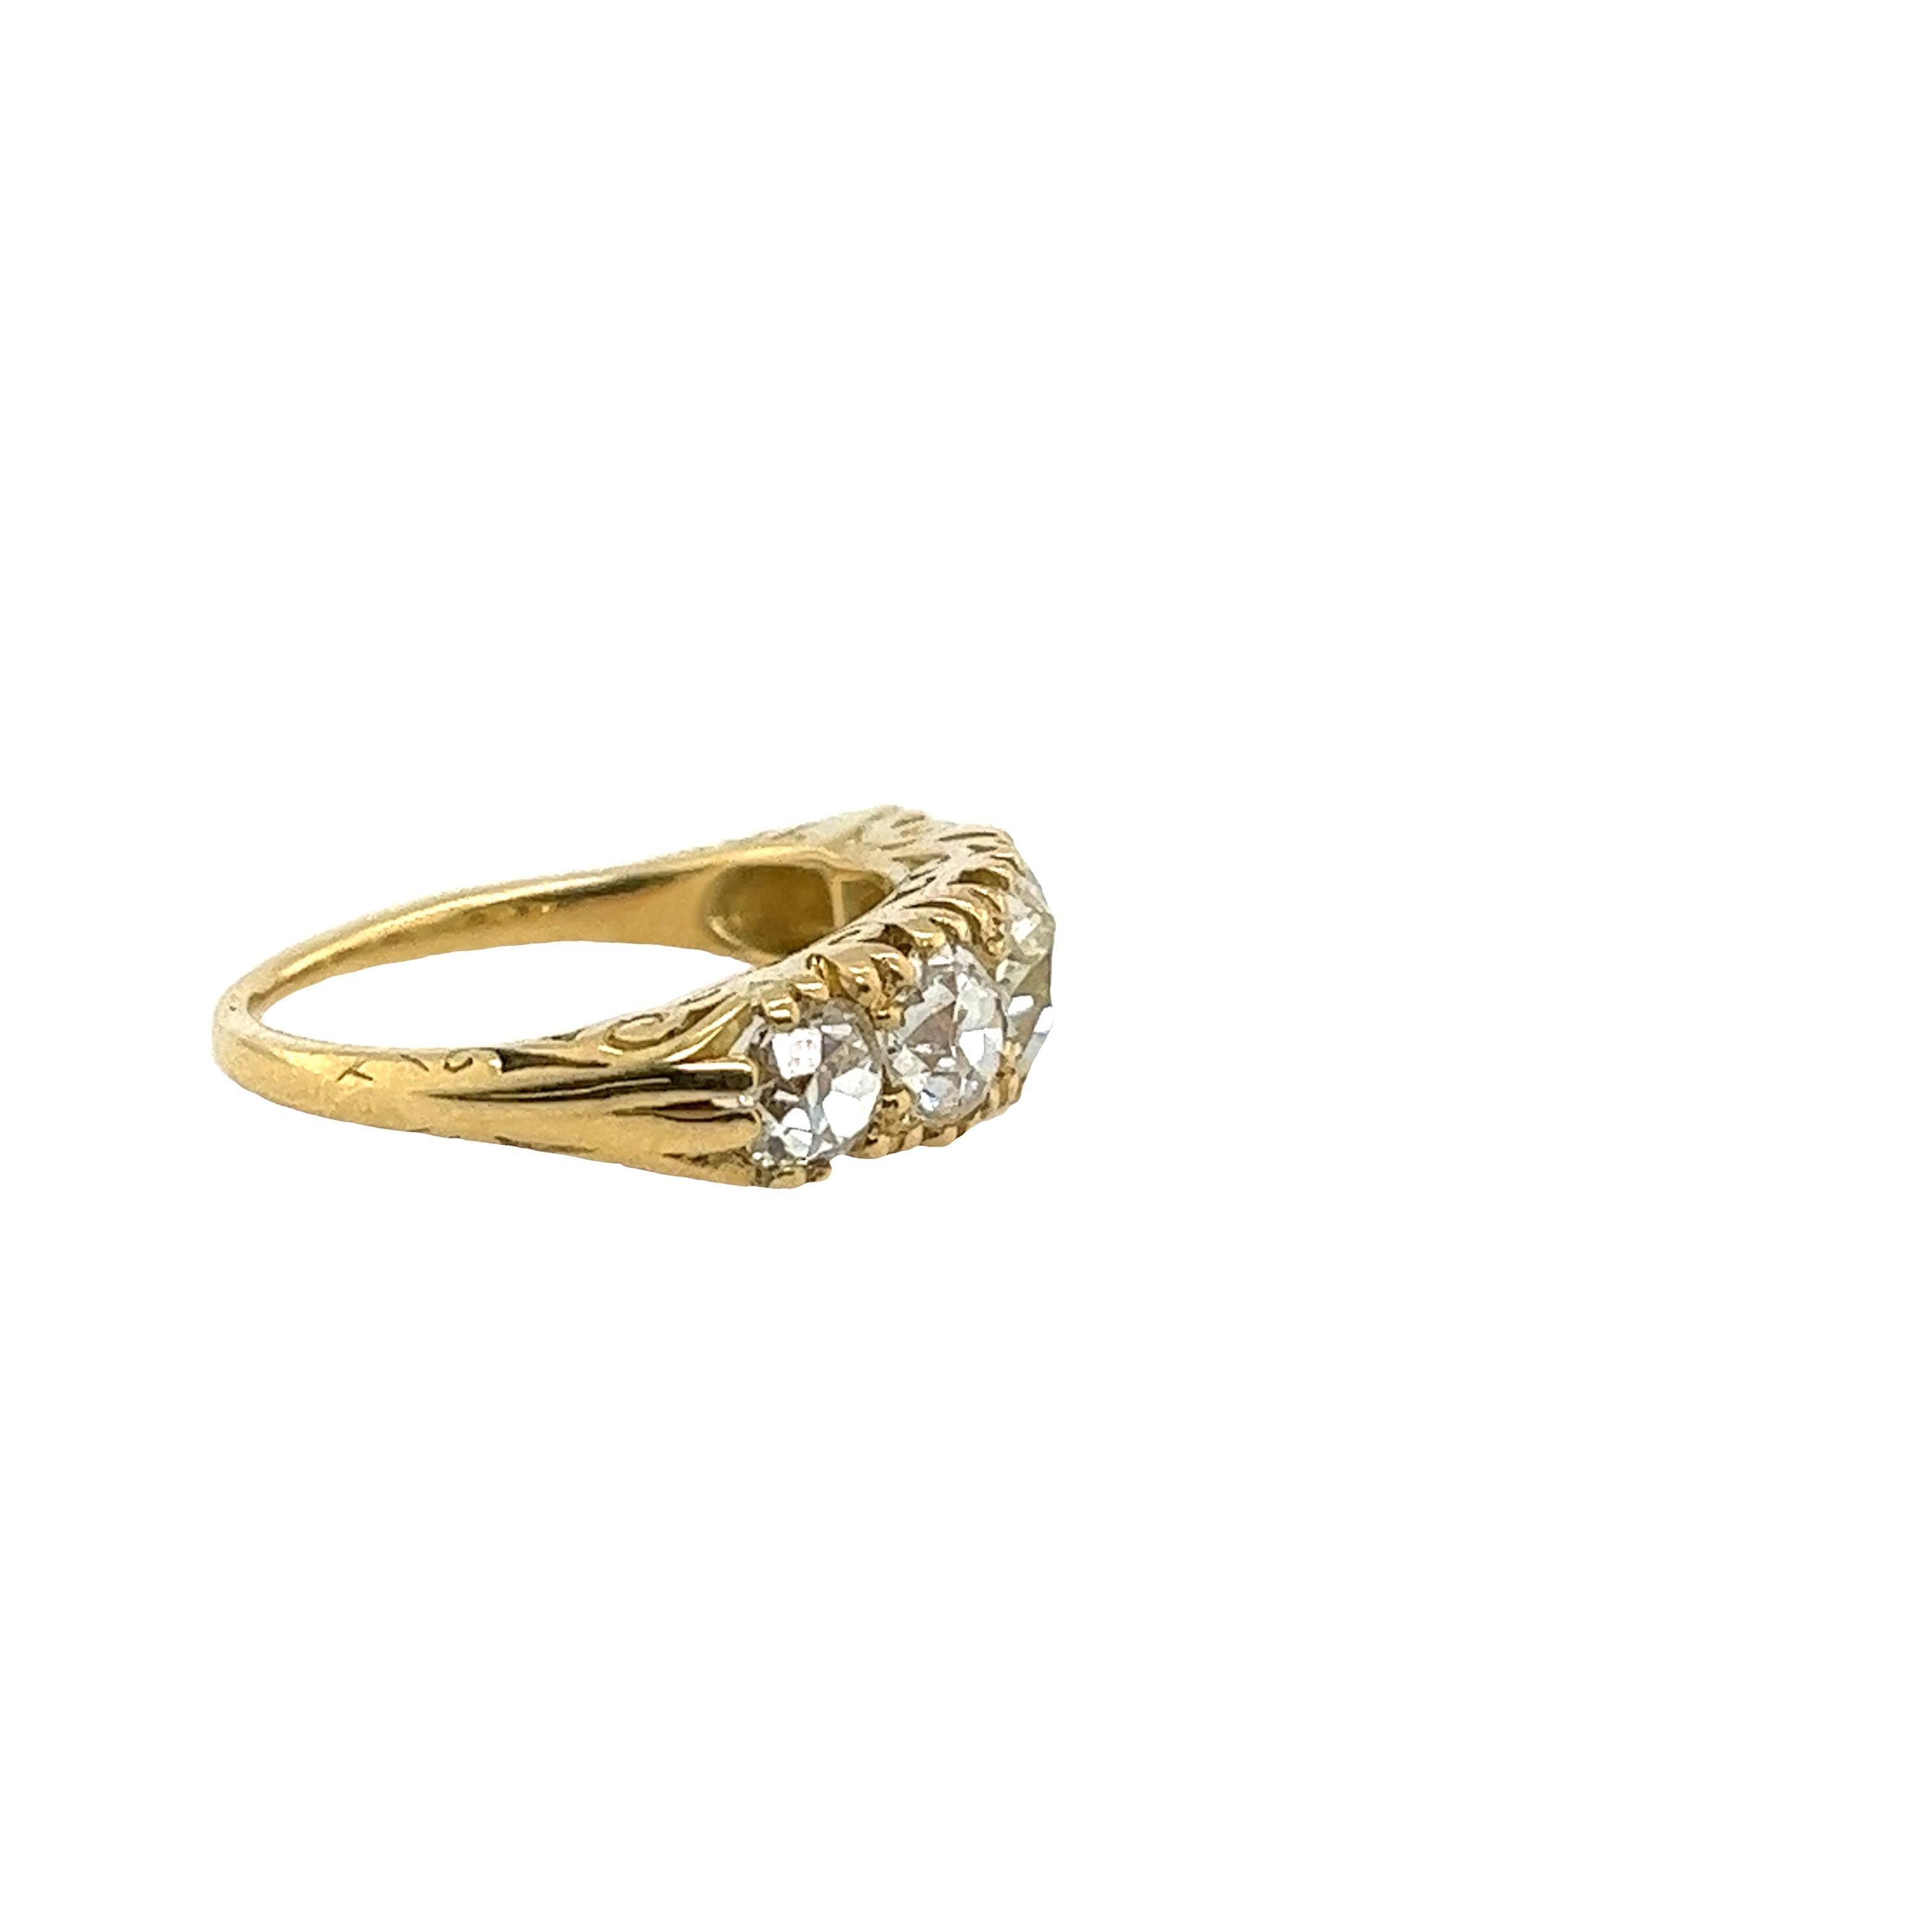 An elegant vintage 5-stone diamond ring, set with 5 old cut diamonds, H colour SI clarity in an 18ct yellow gold setting.
Total Diamond Weight: 1.95ct
Diamond Colour: H
Diamond Clarity: SI1
Width of Band: 1.25mm
Width of Head: 6.63mm
Length of Head: